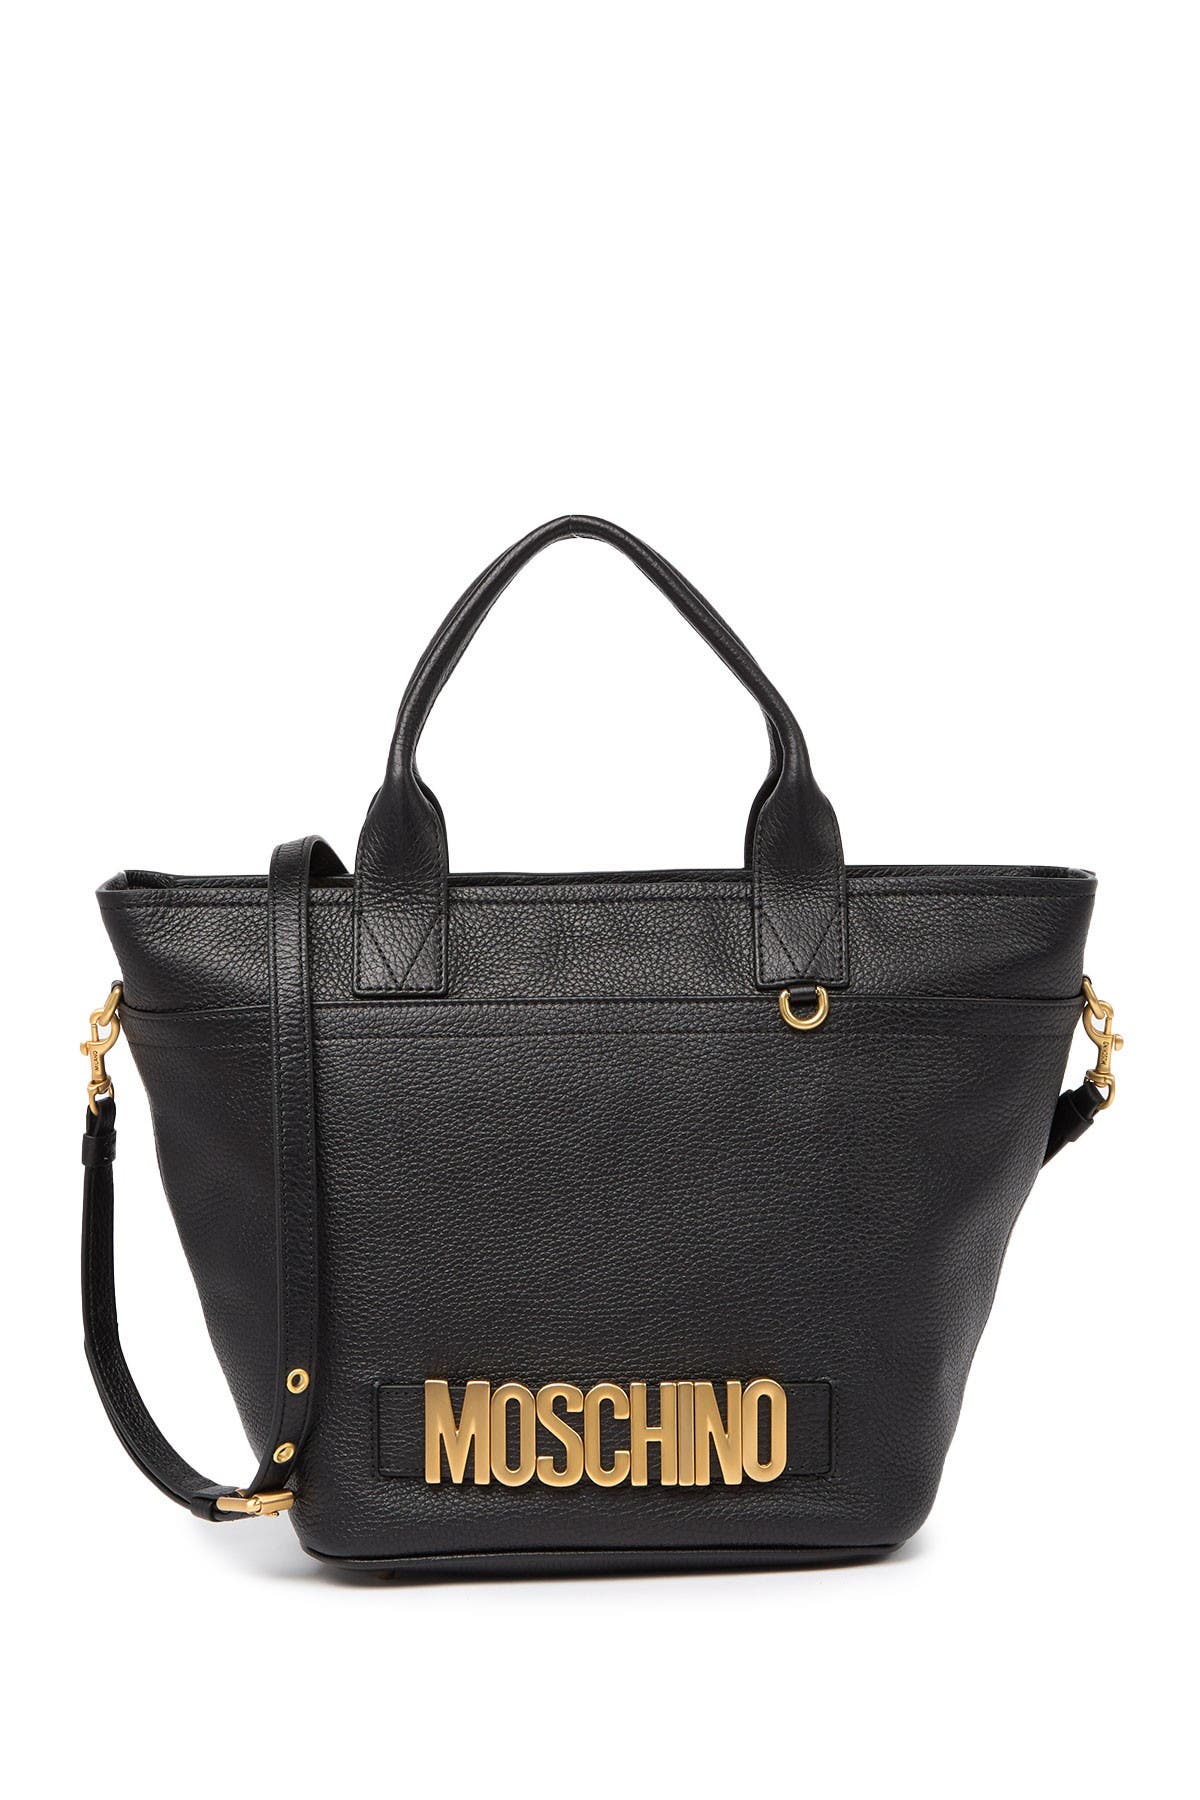 MOSCHINO | Leather Tote Bag | Nordstrom 